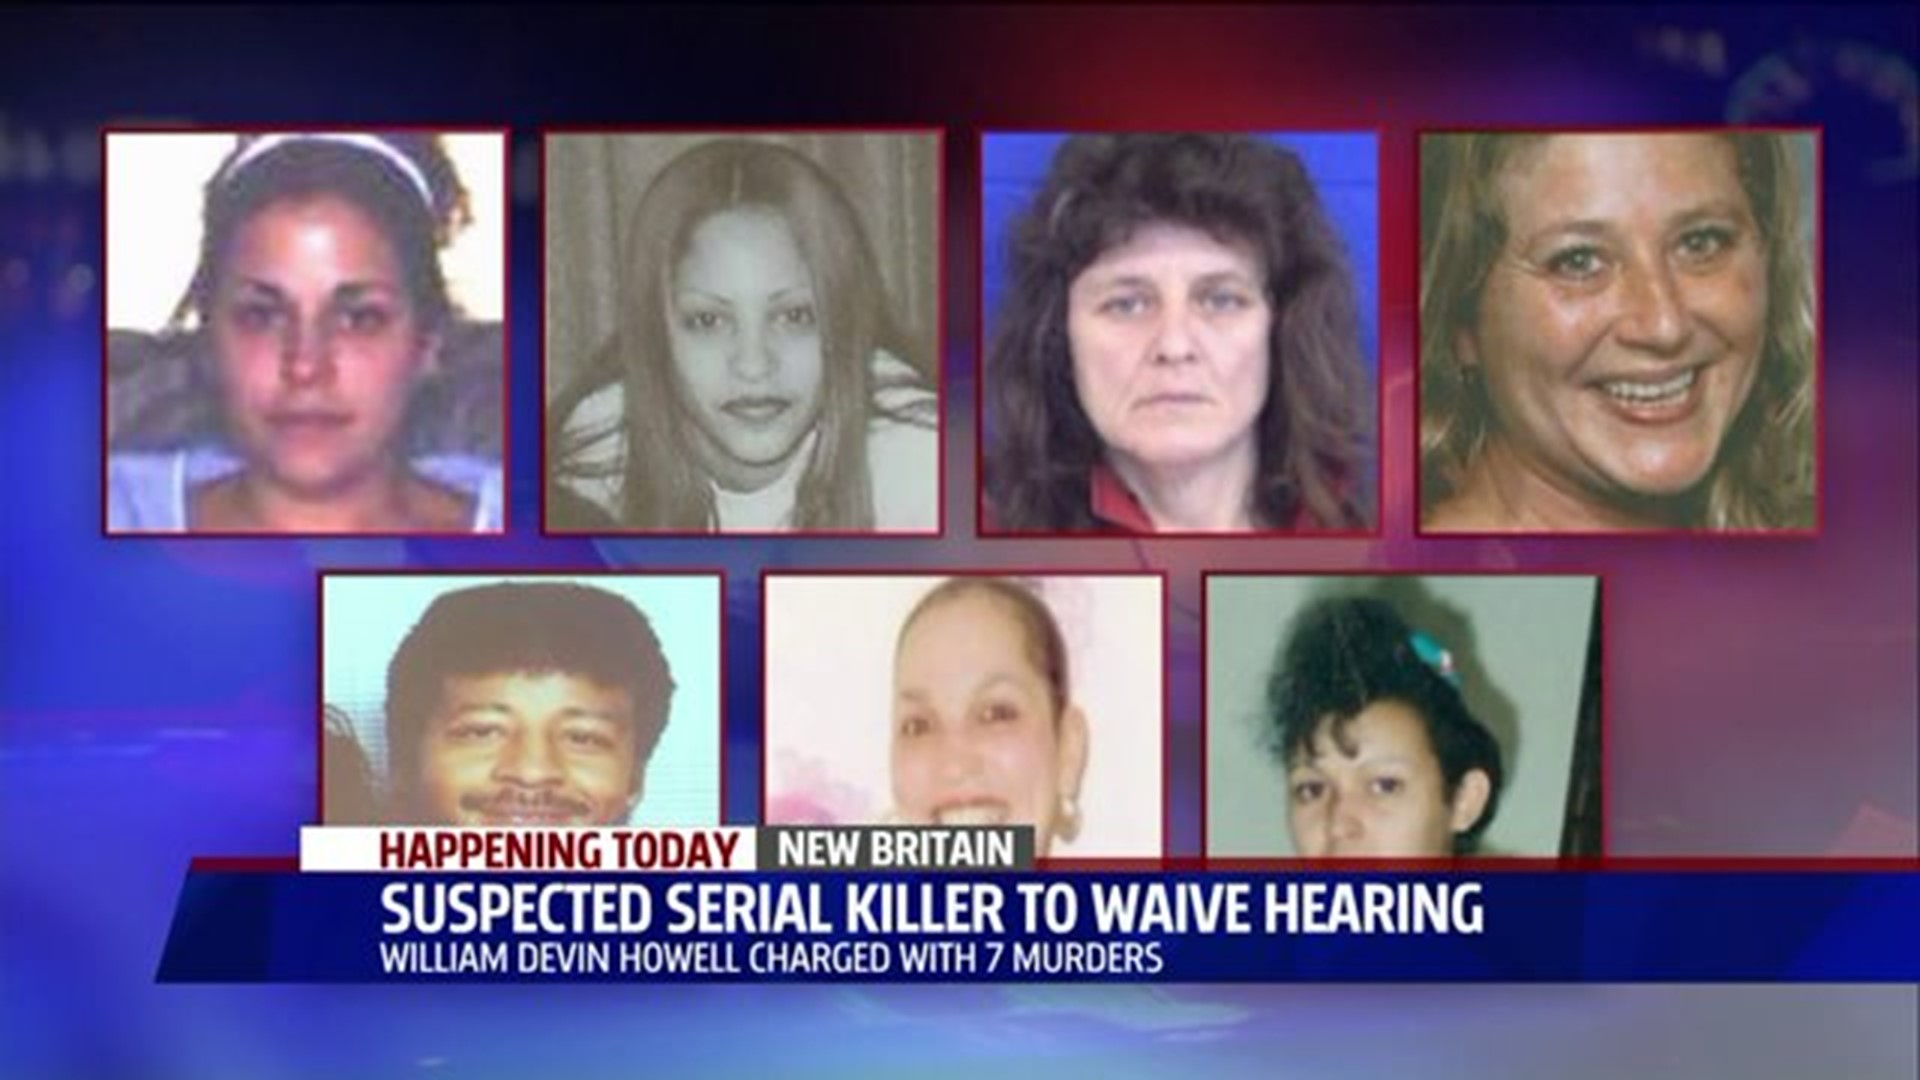 Suspected serial killer expected to waive hearing